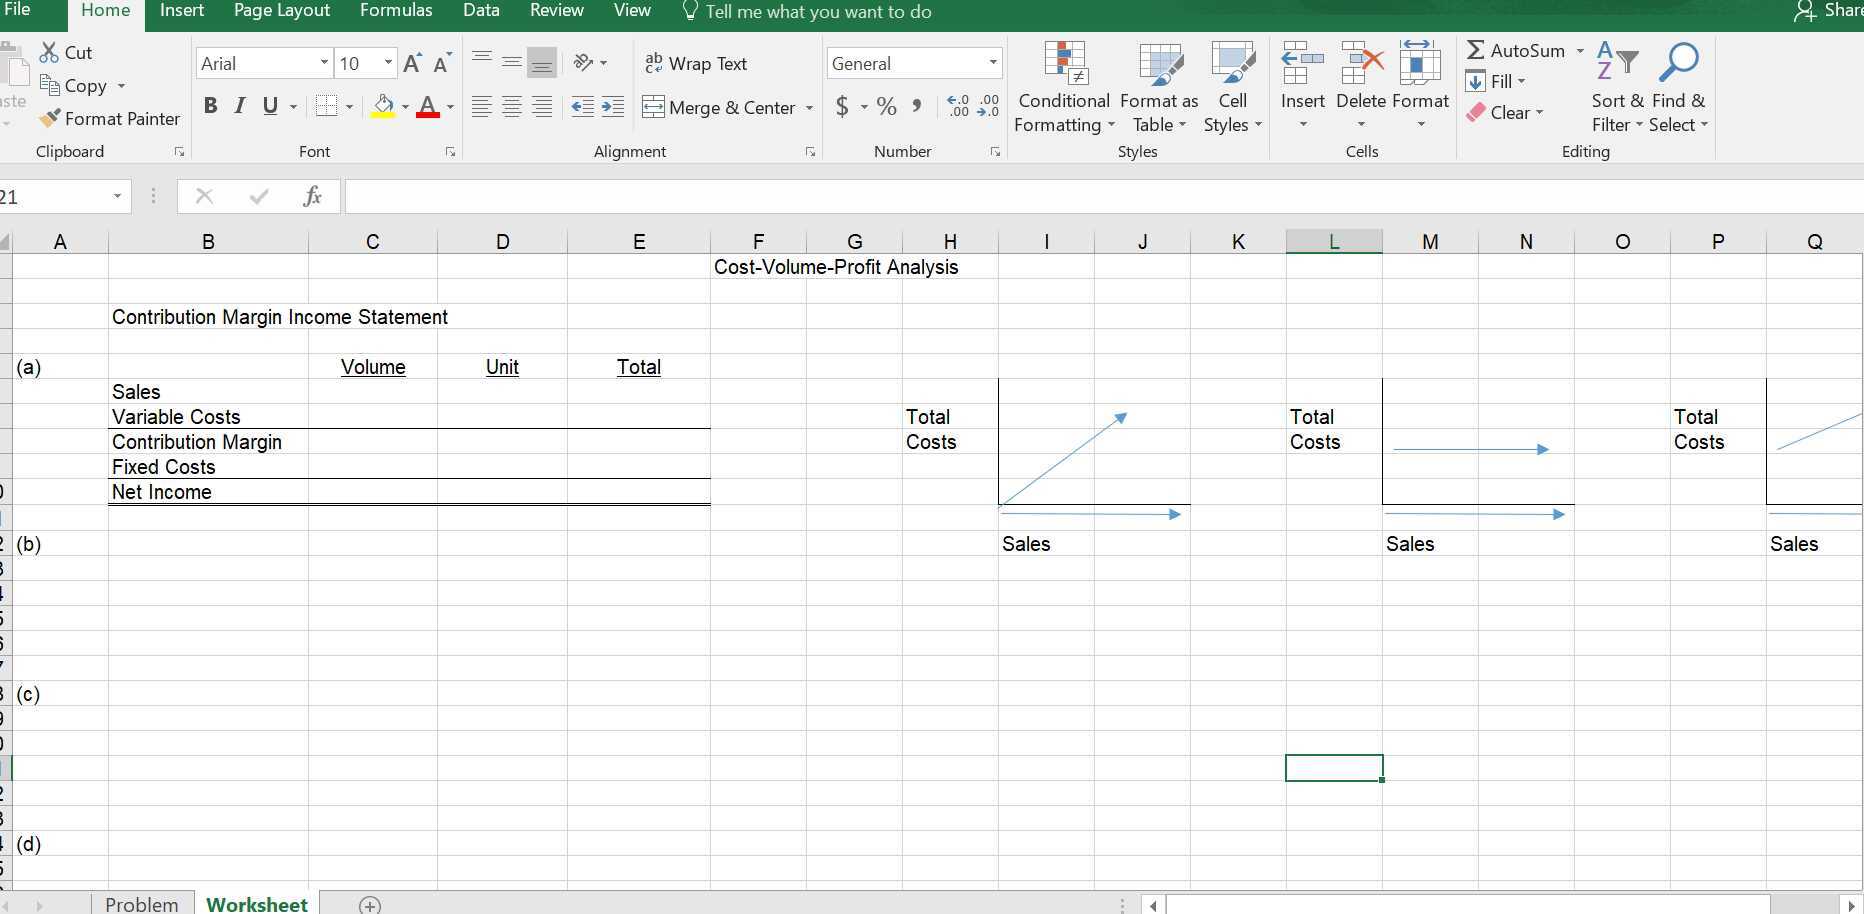 How To Create A Cvp Chart In Excel